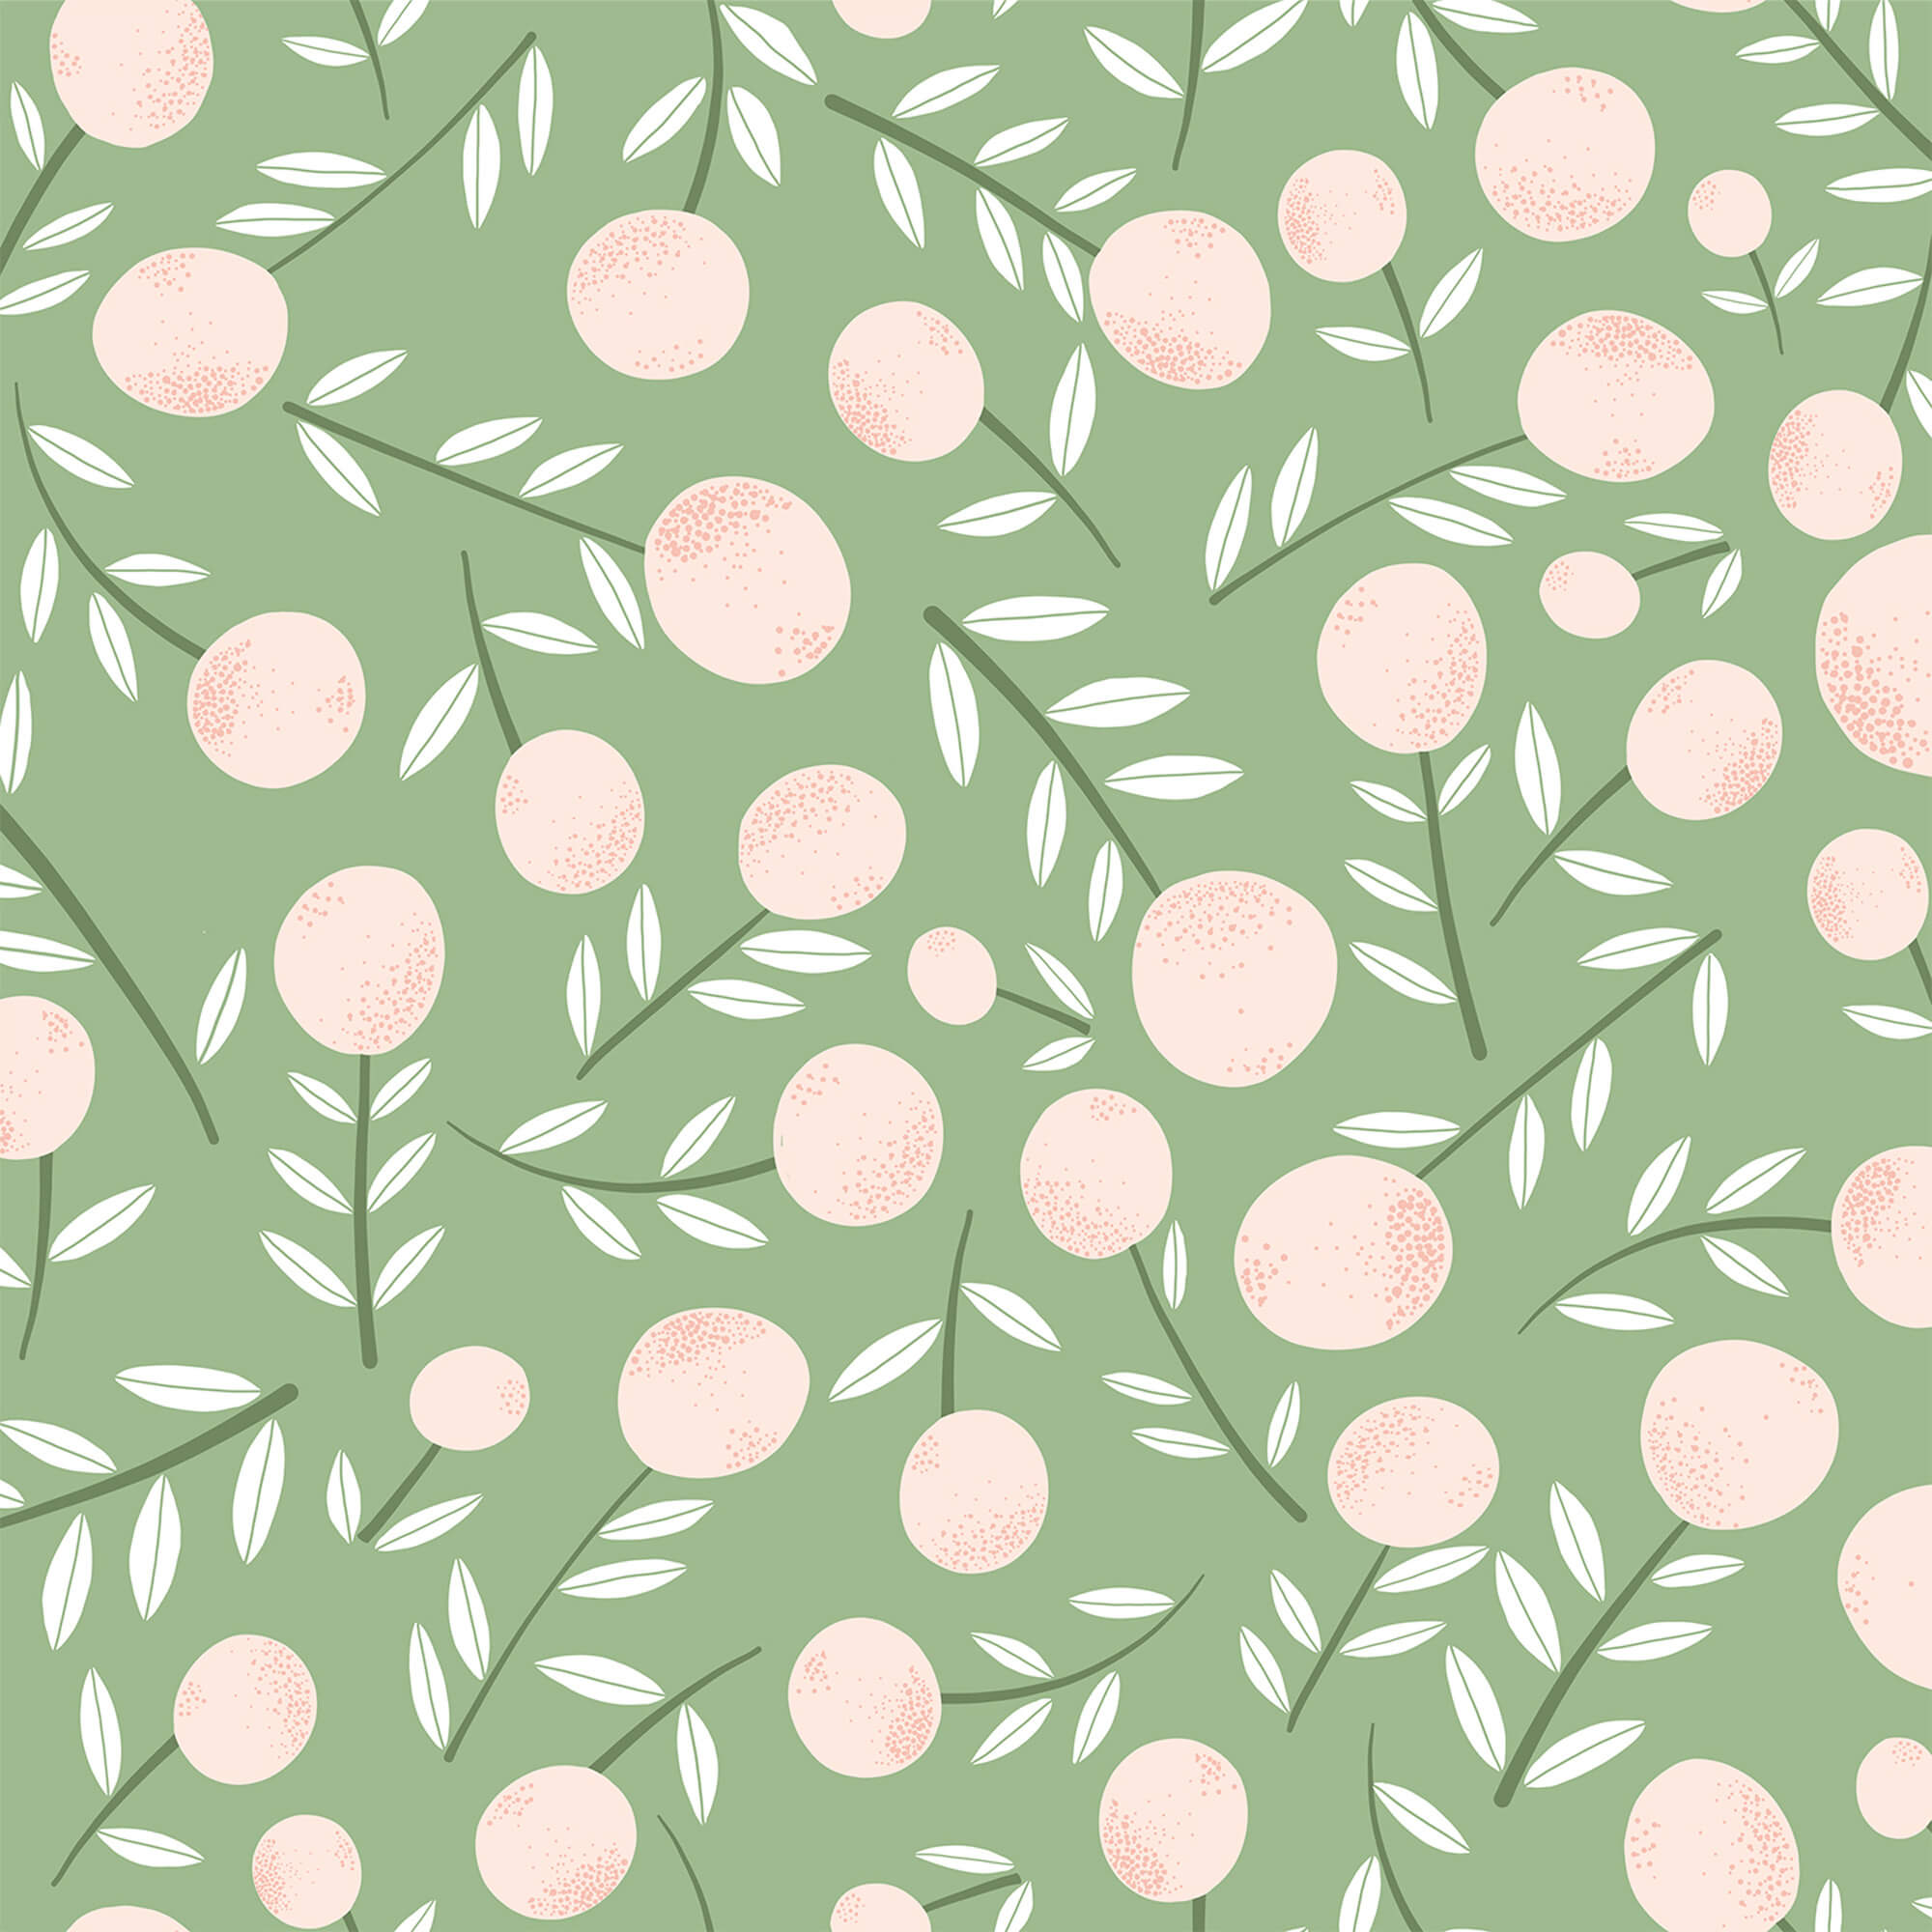 Maine Cottage Let's Grove: Sage Fabric By The Yard | Maine Cottage® 